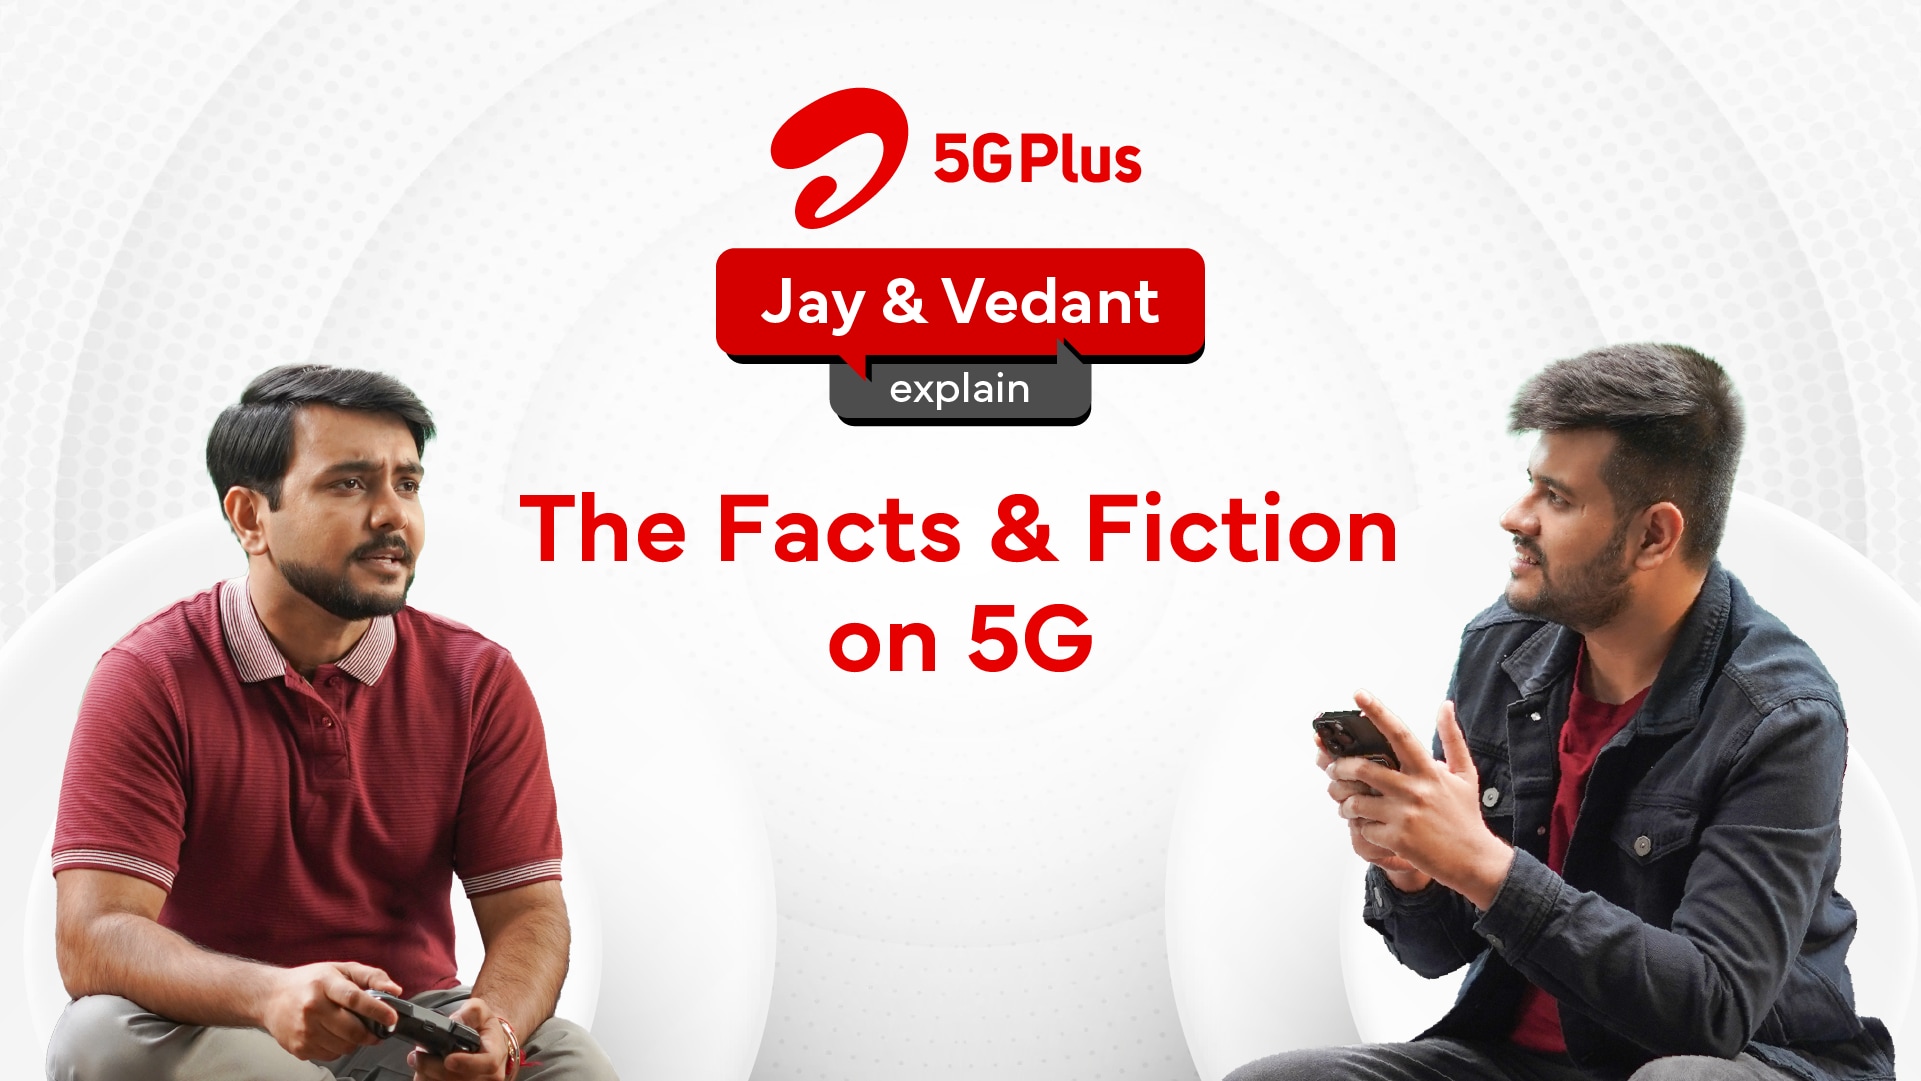 Airtel 5G - Experience the SuperFast 5G Network in India